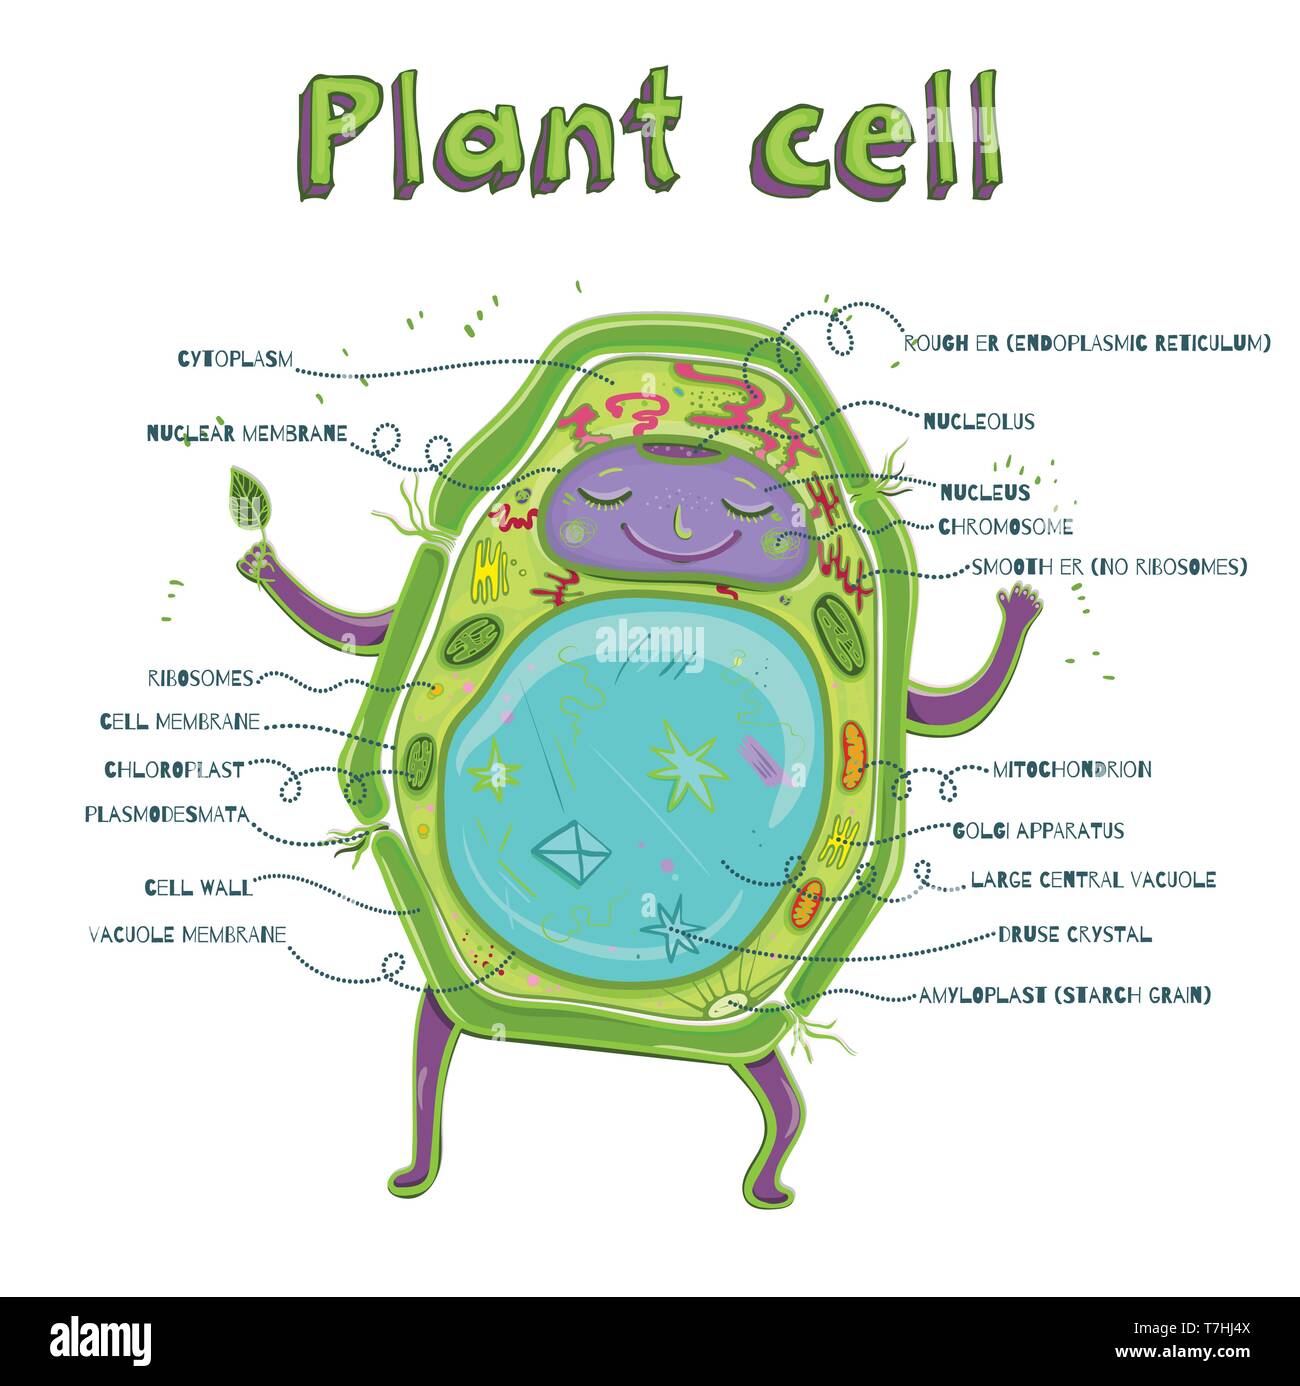 Cartoon vector illustration of structure of plant cell. Illustration showing the plant cell anatomy Stock Vector